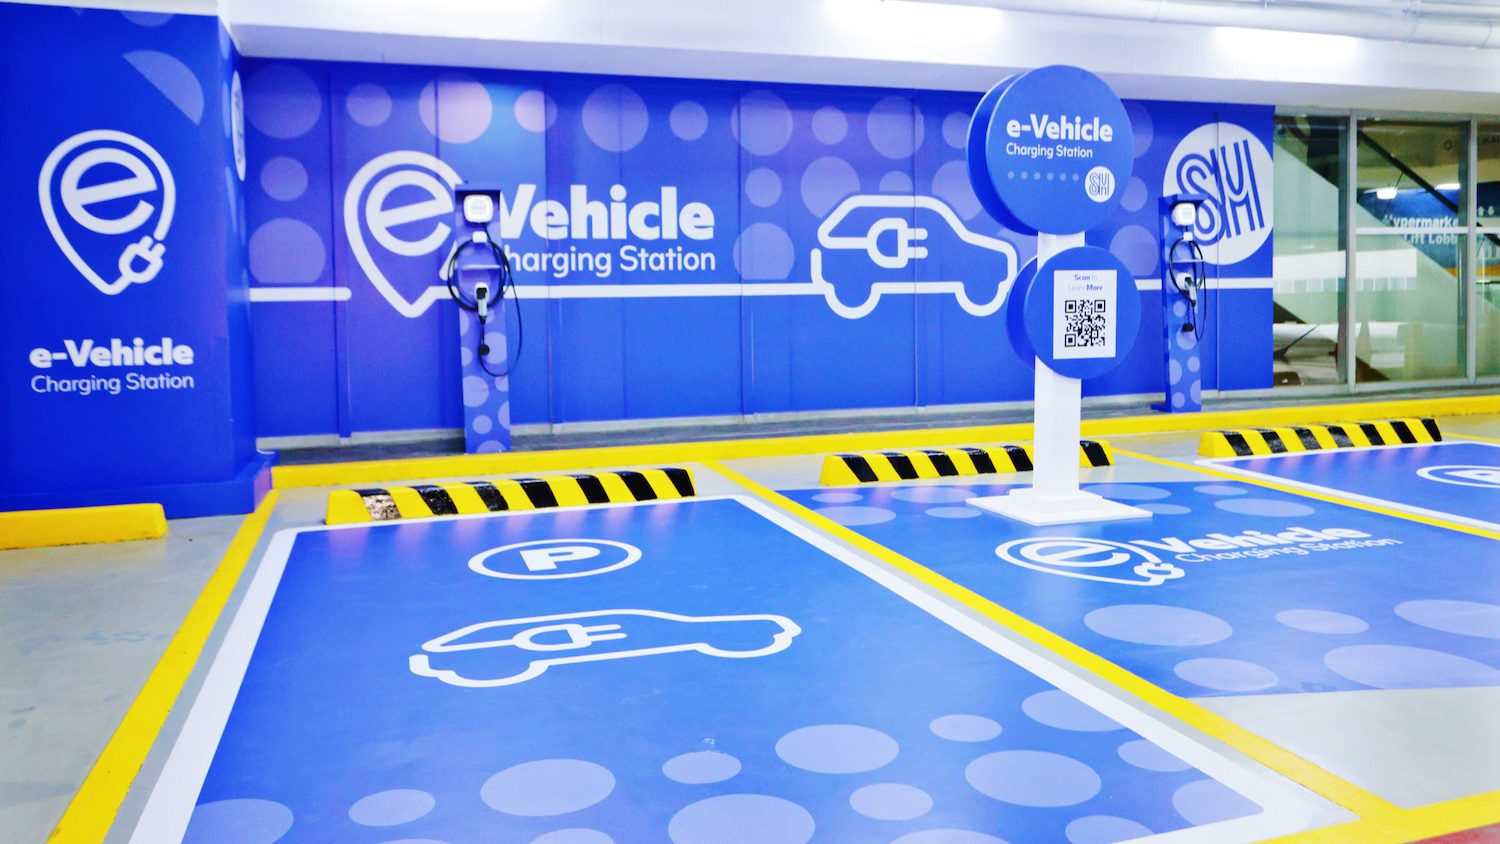 SM Supermalls powers up sustainability efforts with more e-Vehicle charging stations